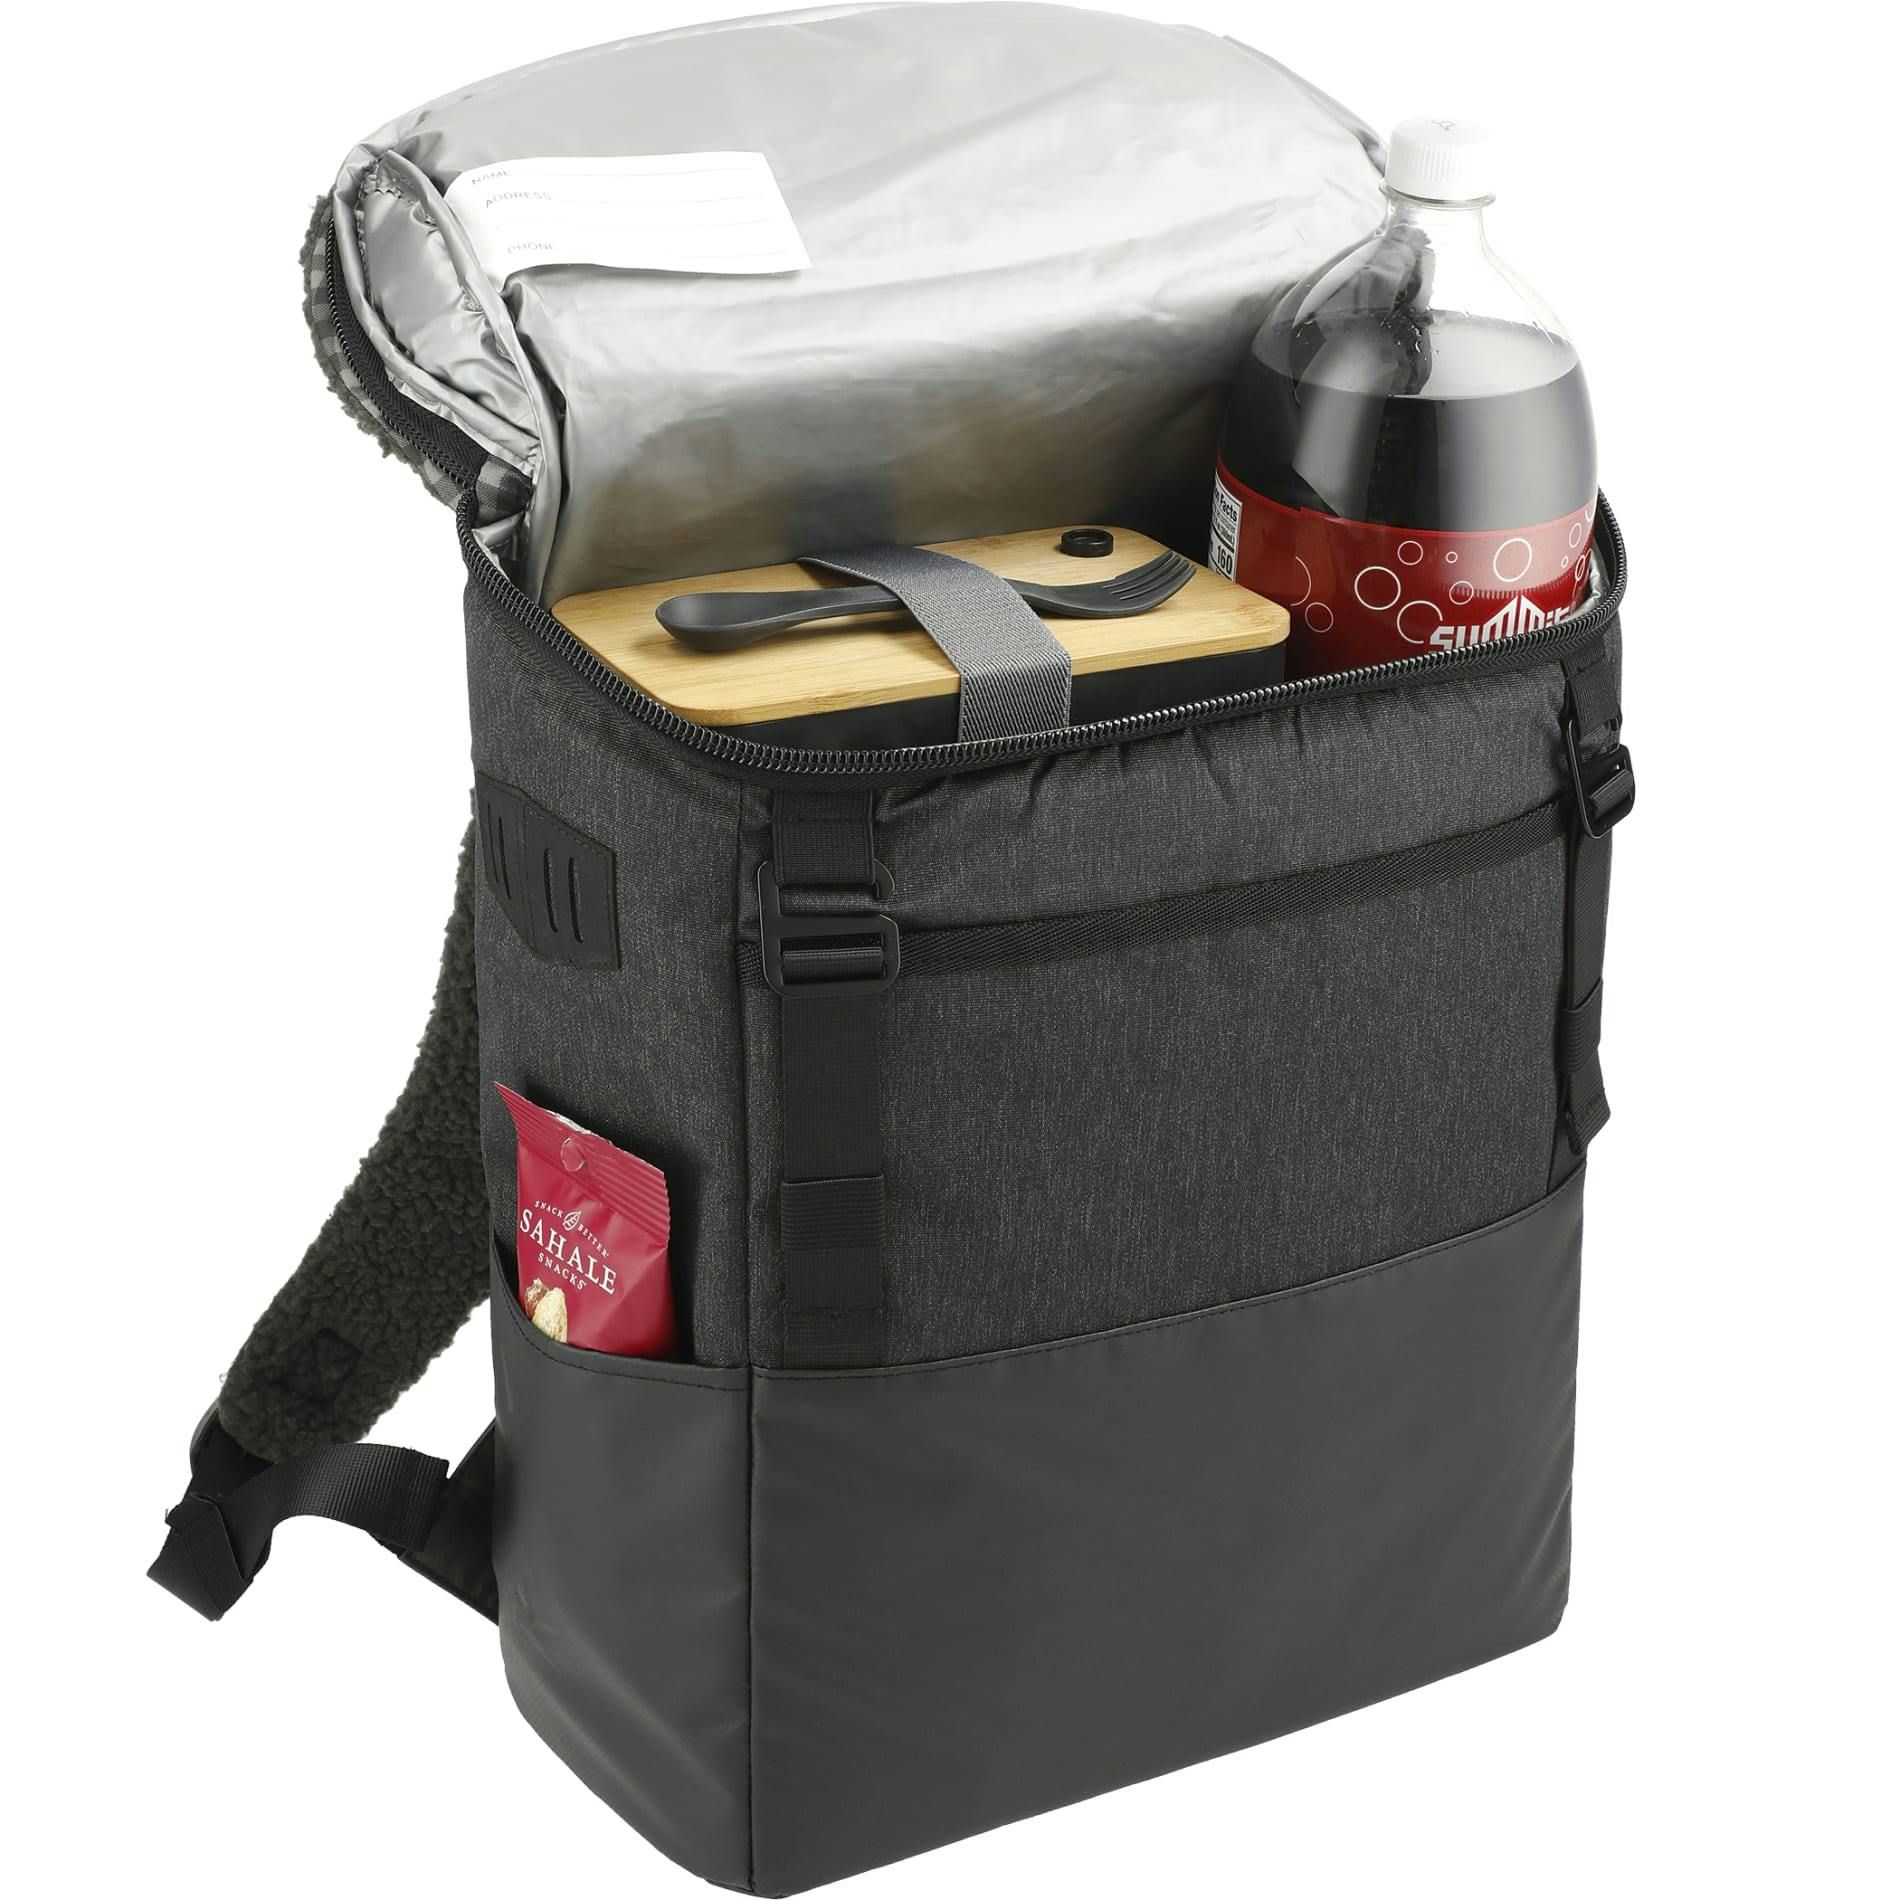 Field & Co. Fireside Eco 12 Can Backpack Cooler - additional Image 4